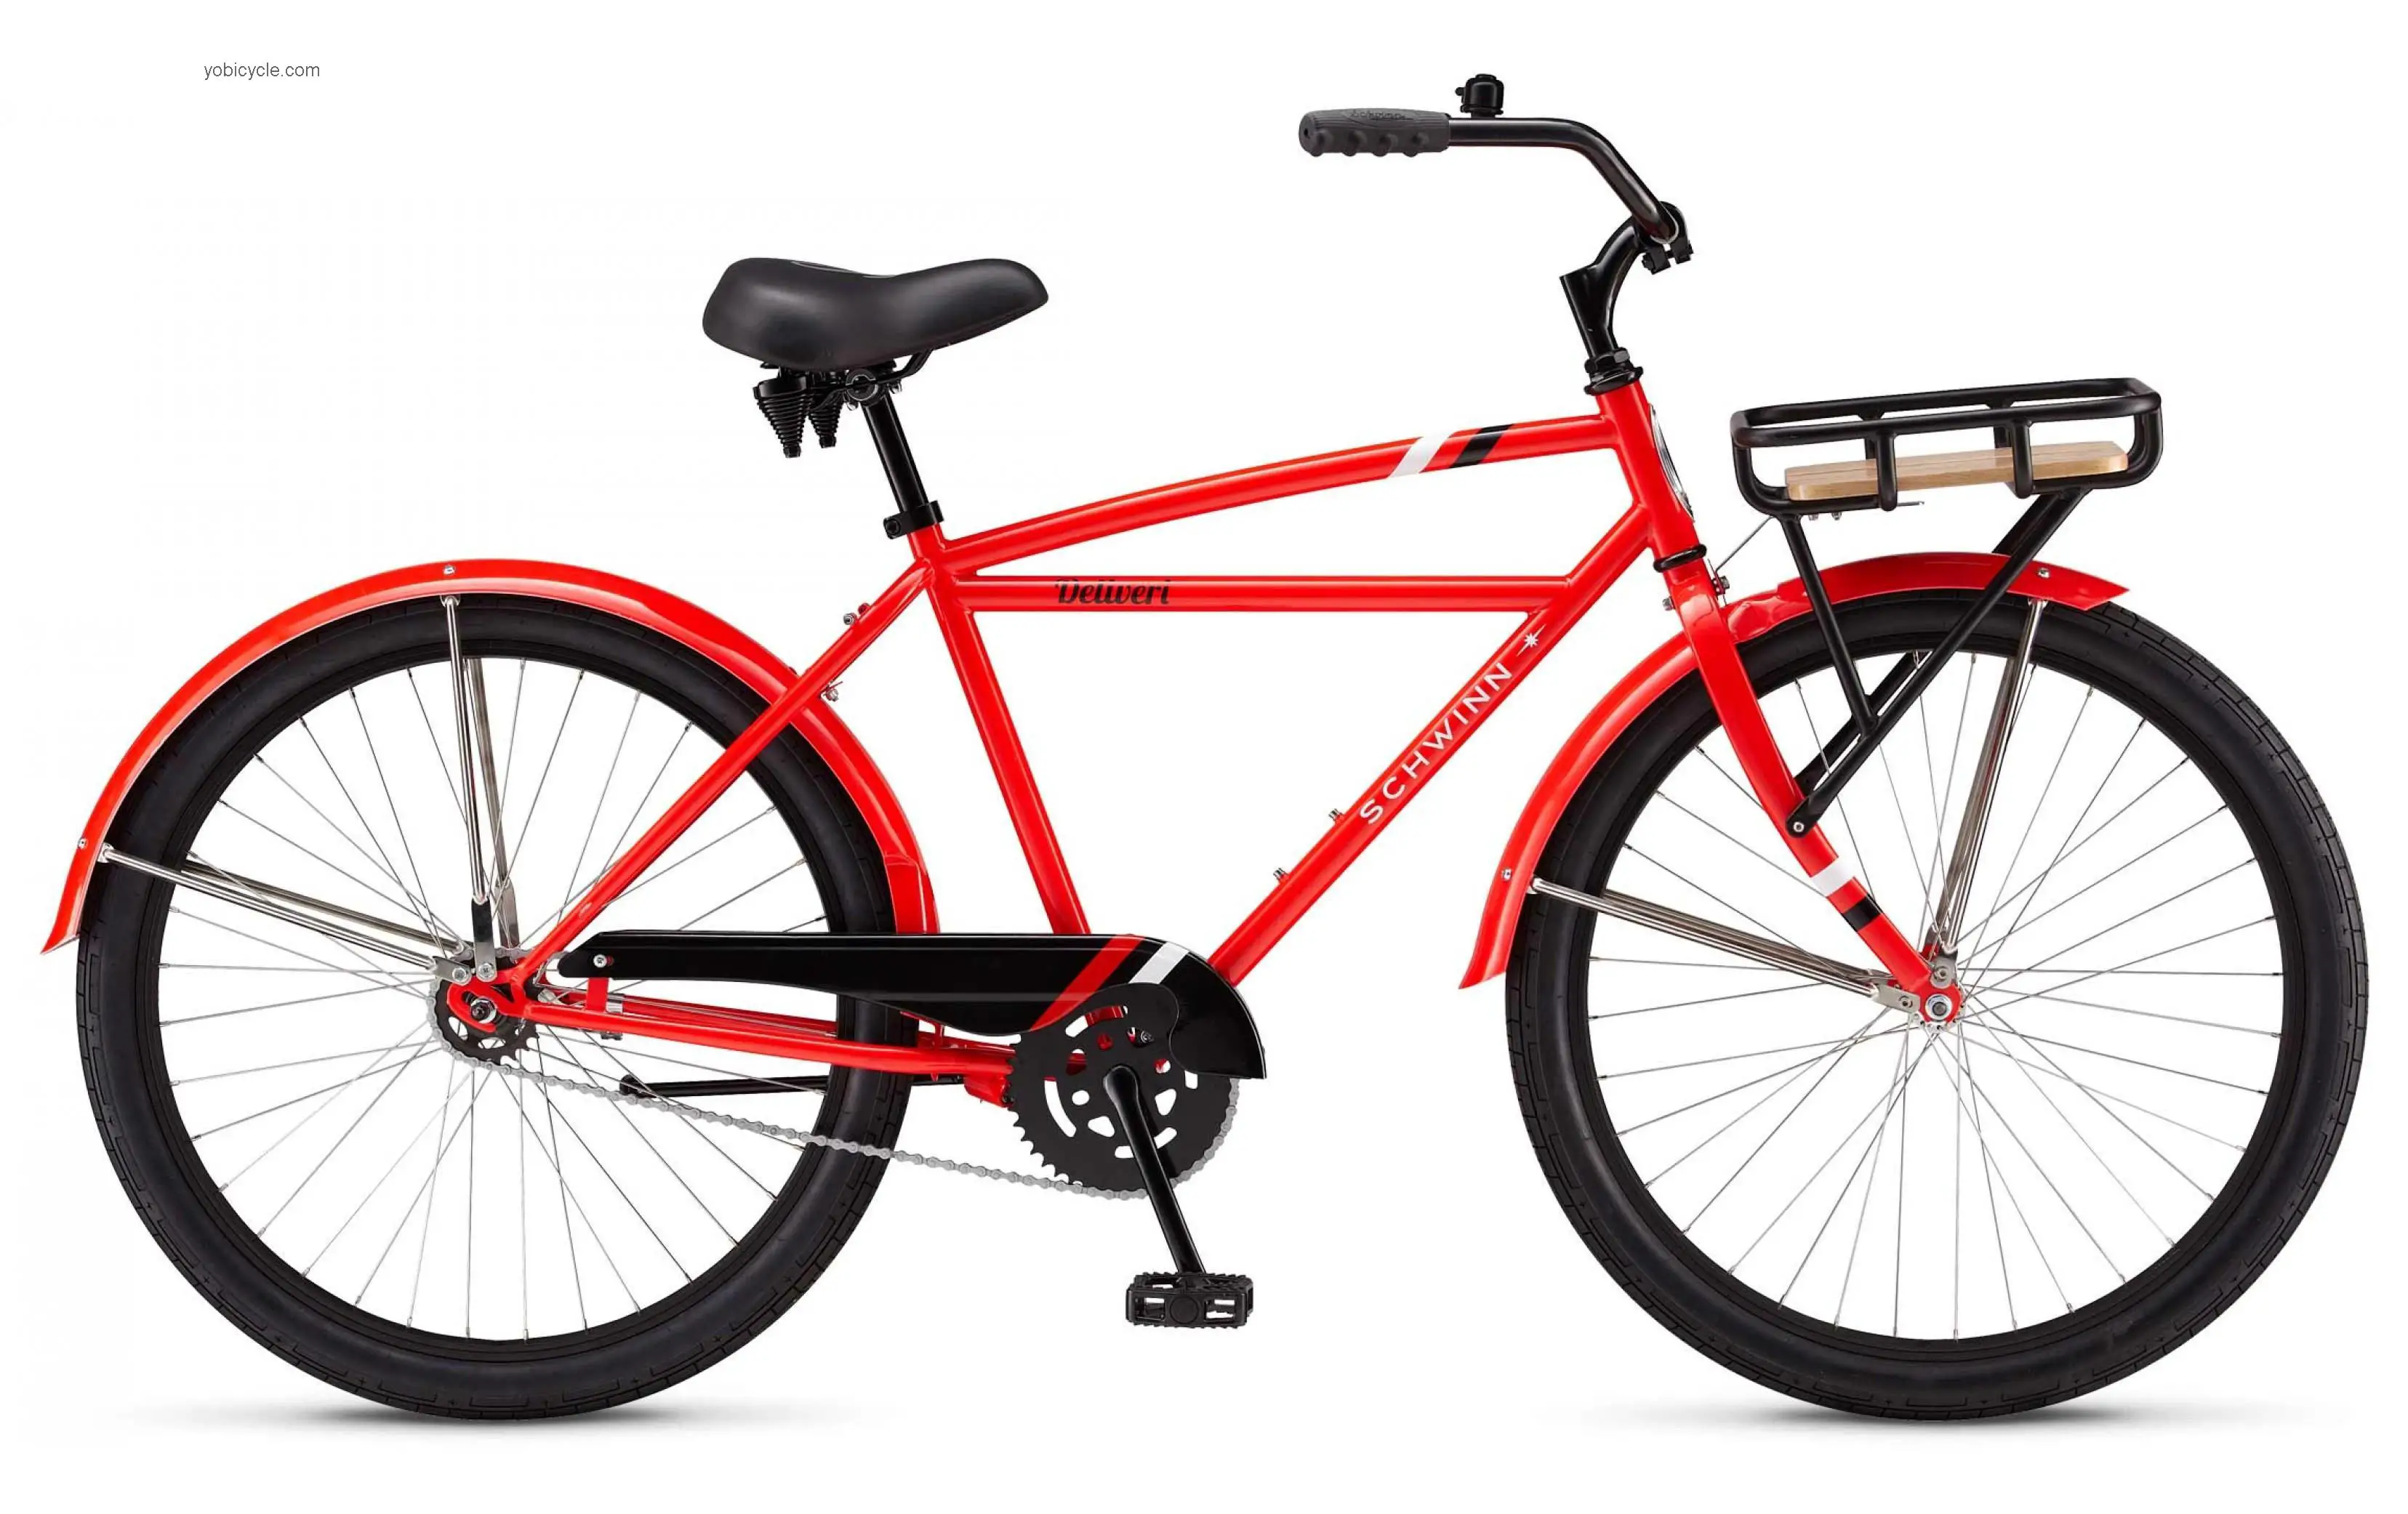 Schwinn  Deliveri Technical data and specifications